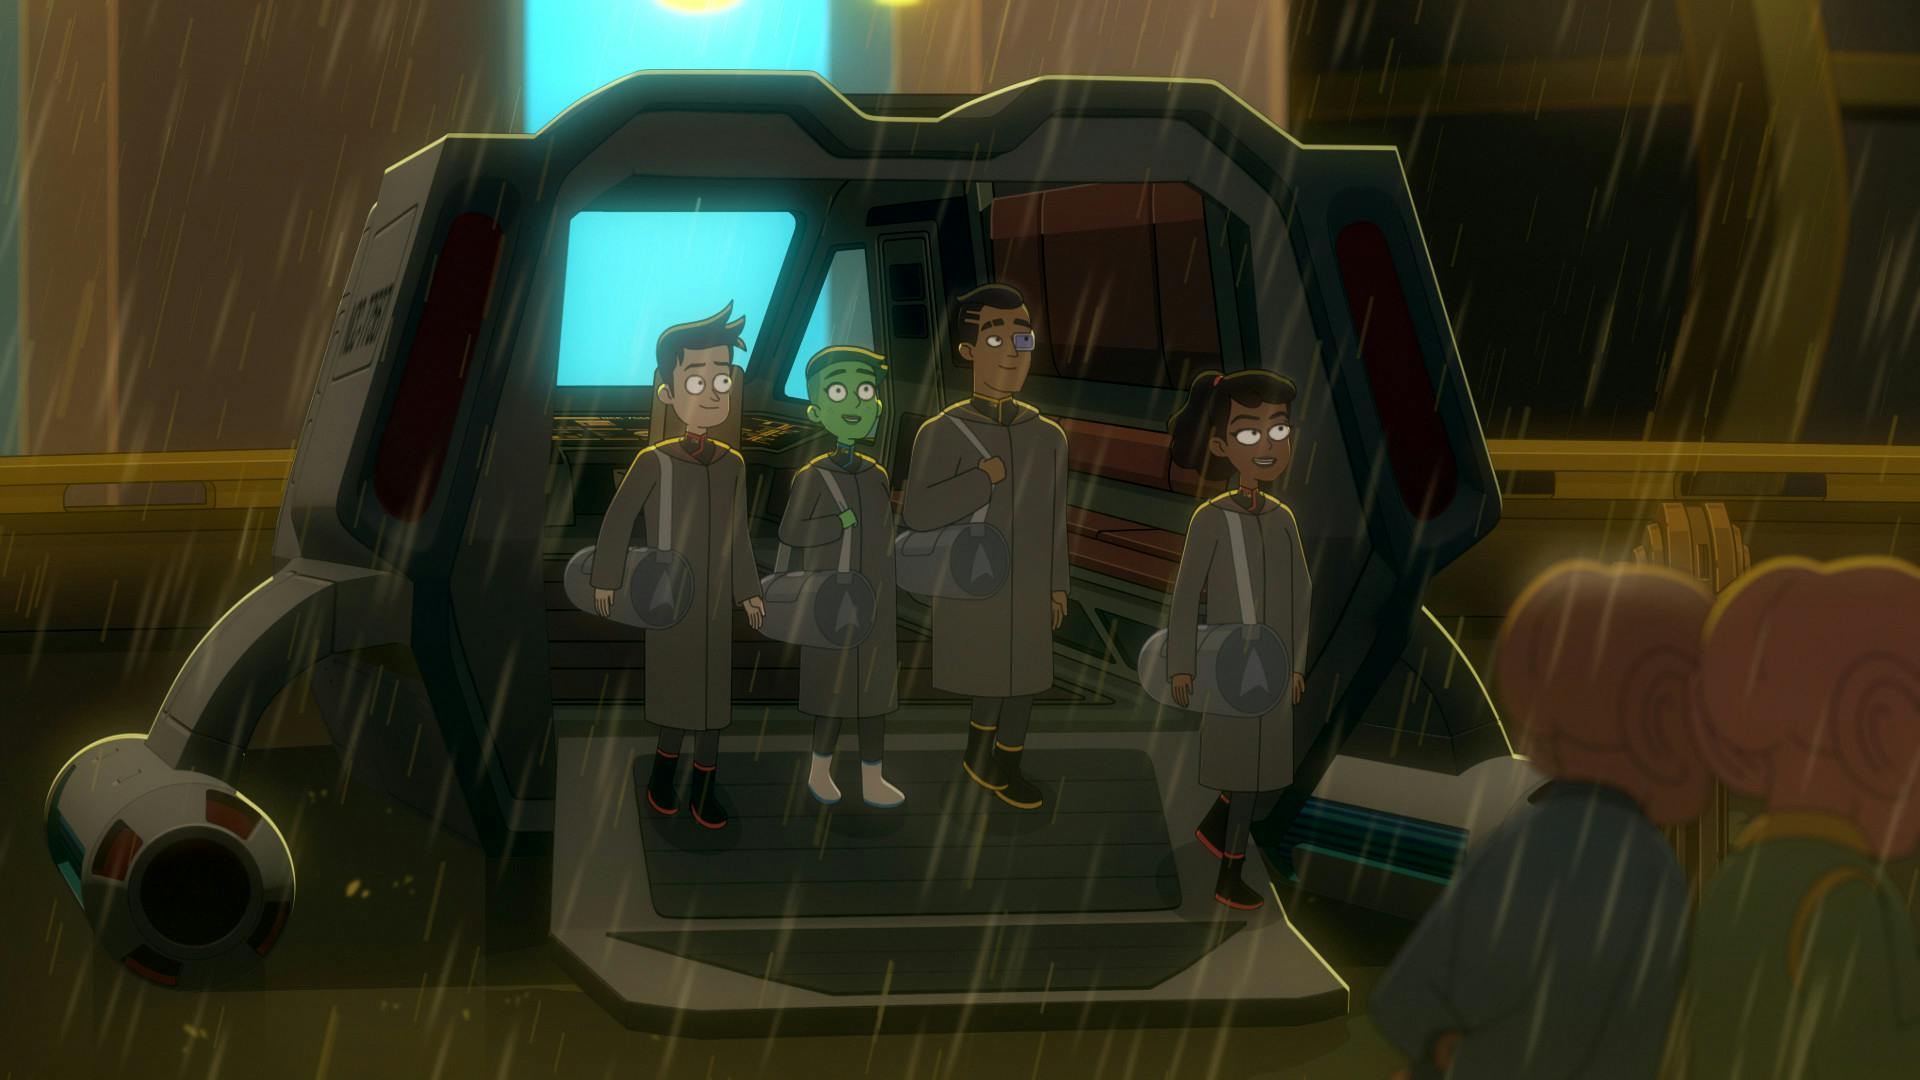 On a rainy day, Boimler, Tendi, Rutherford, and Mariner disembark their shuttle on the Ferengi homeworld Ferenginar in 'Parth Ferengi's Heart Place'